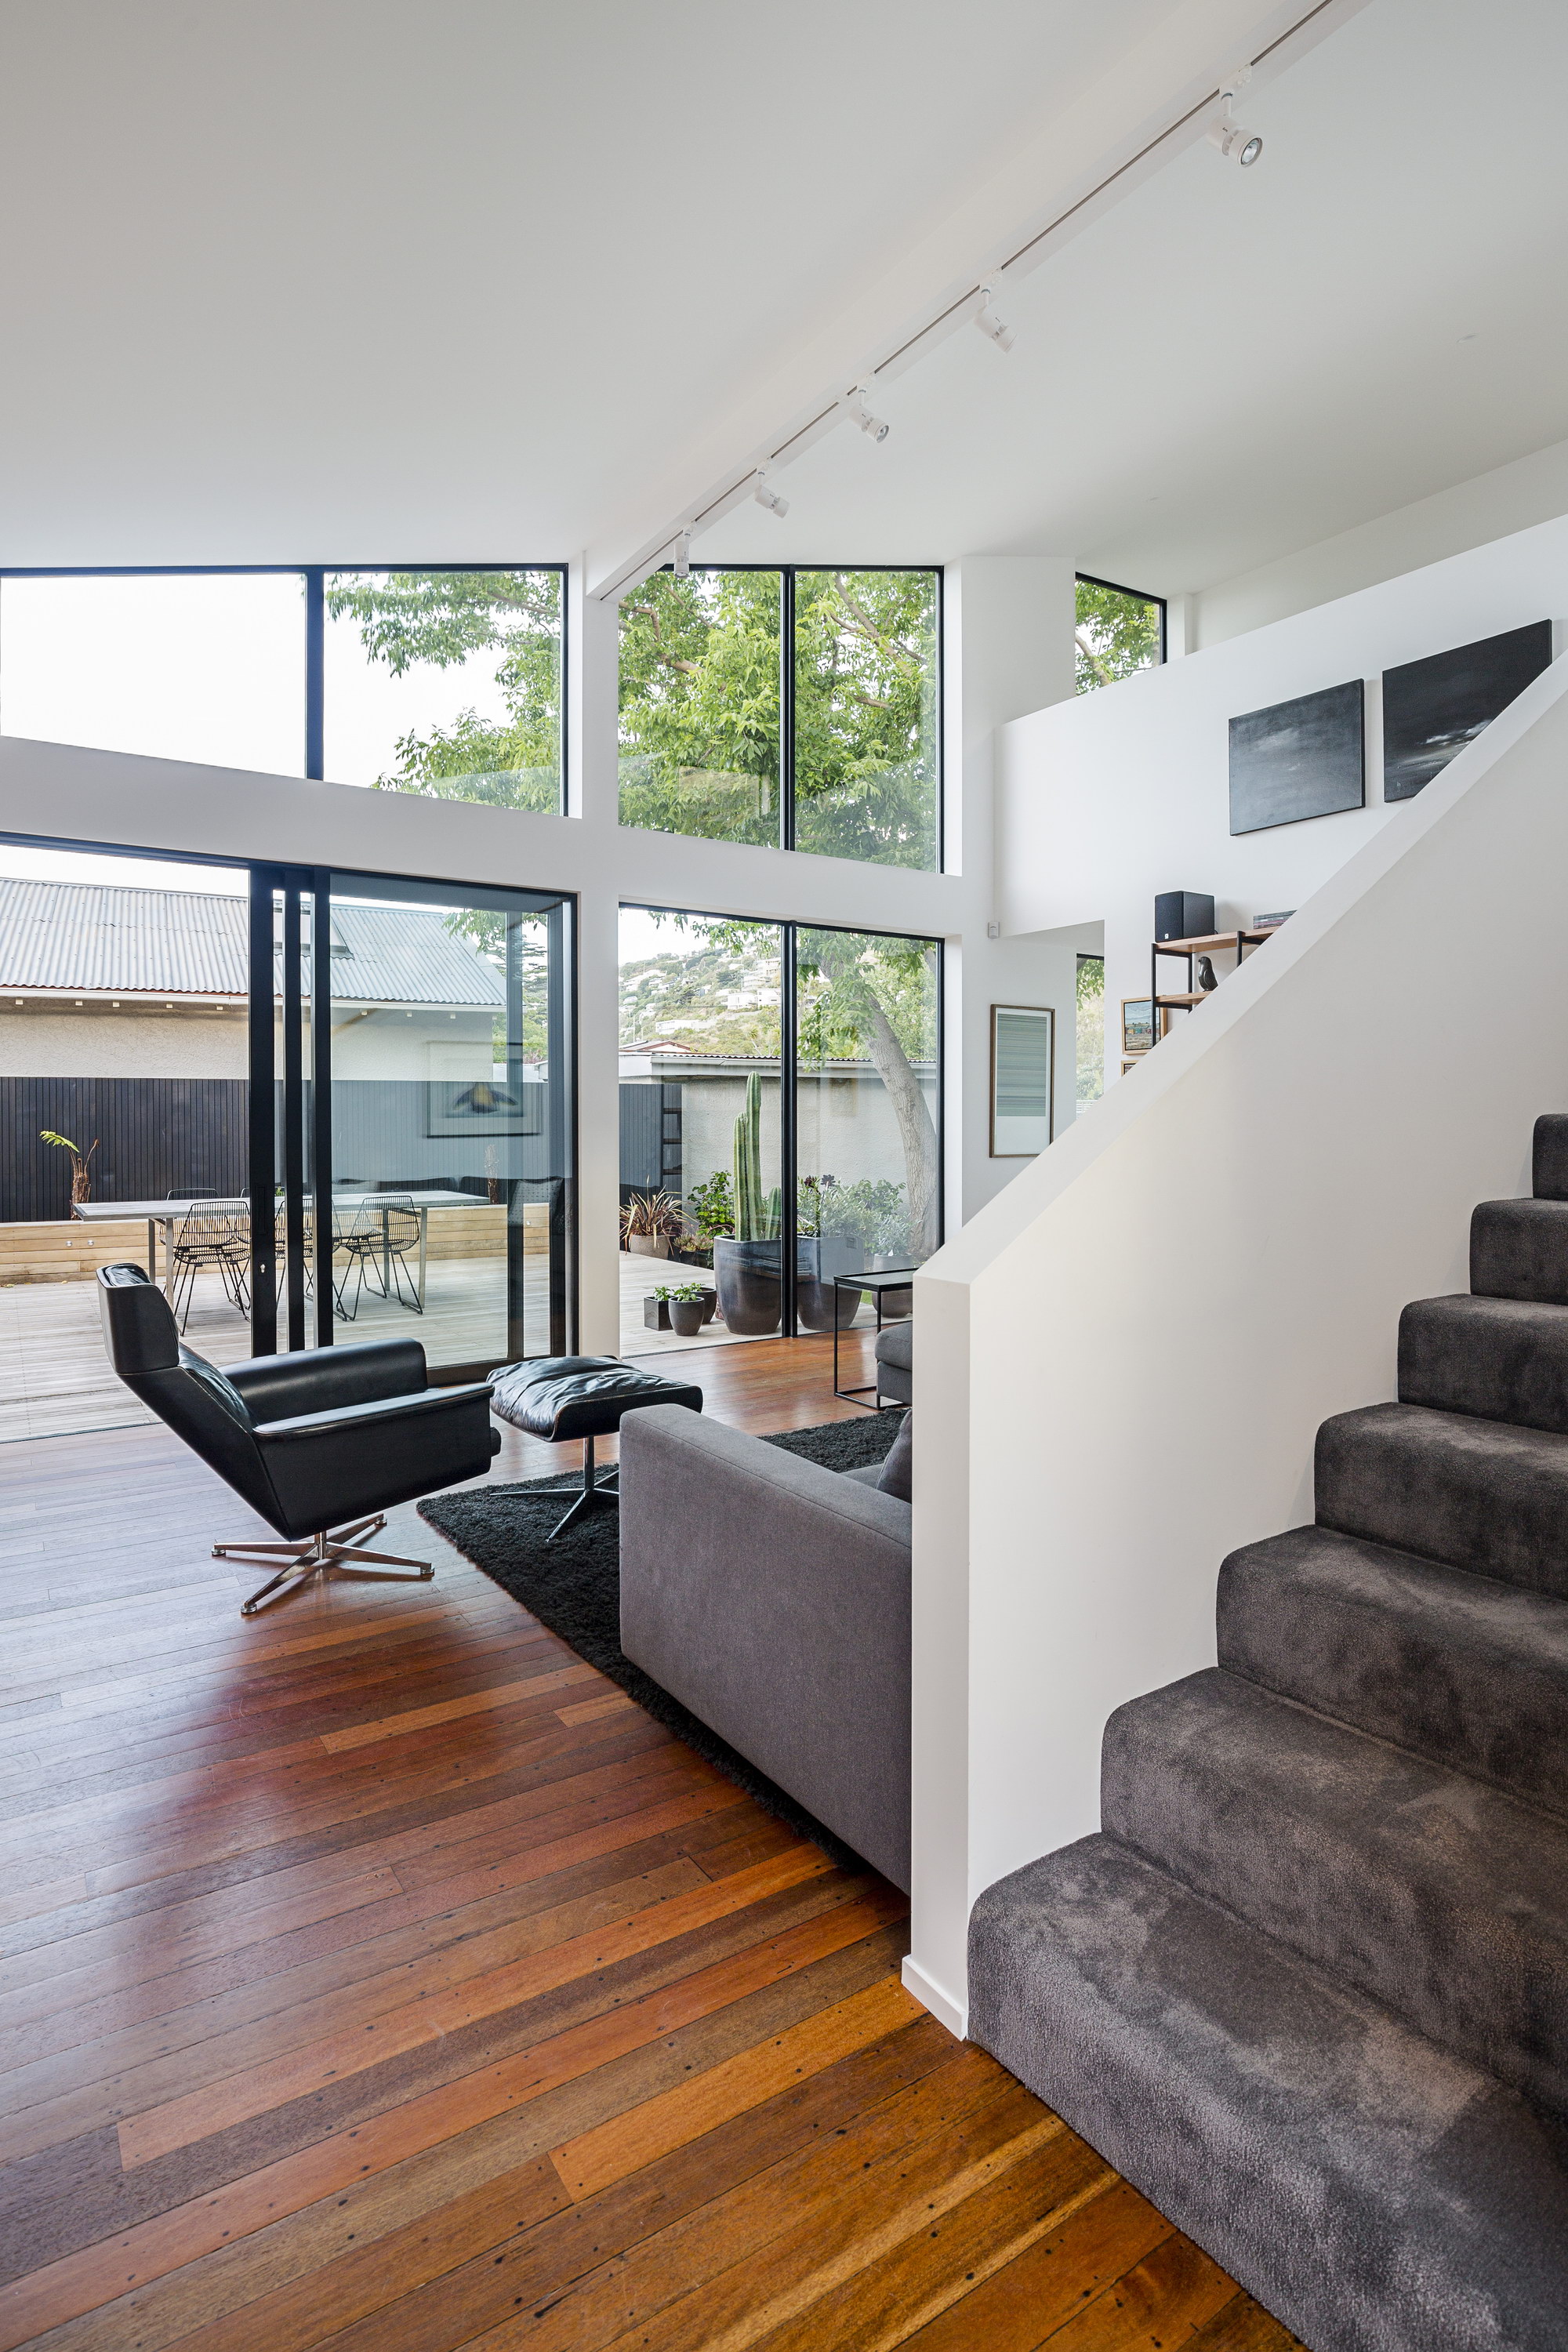 Sumner House by AW Architects